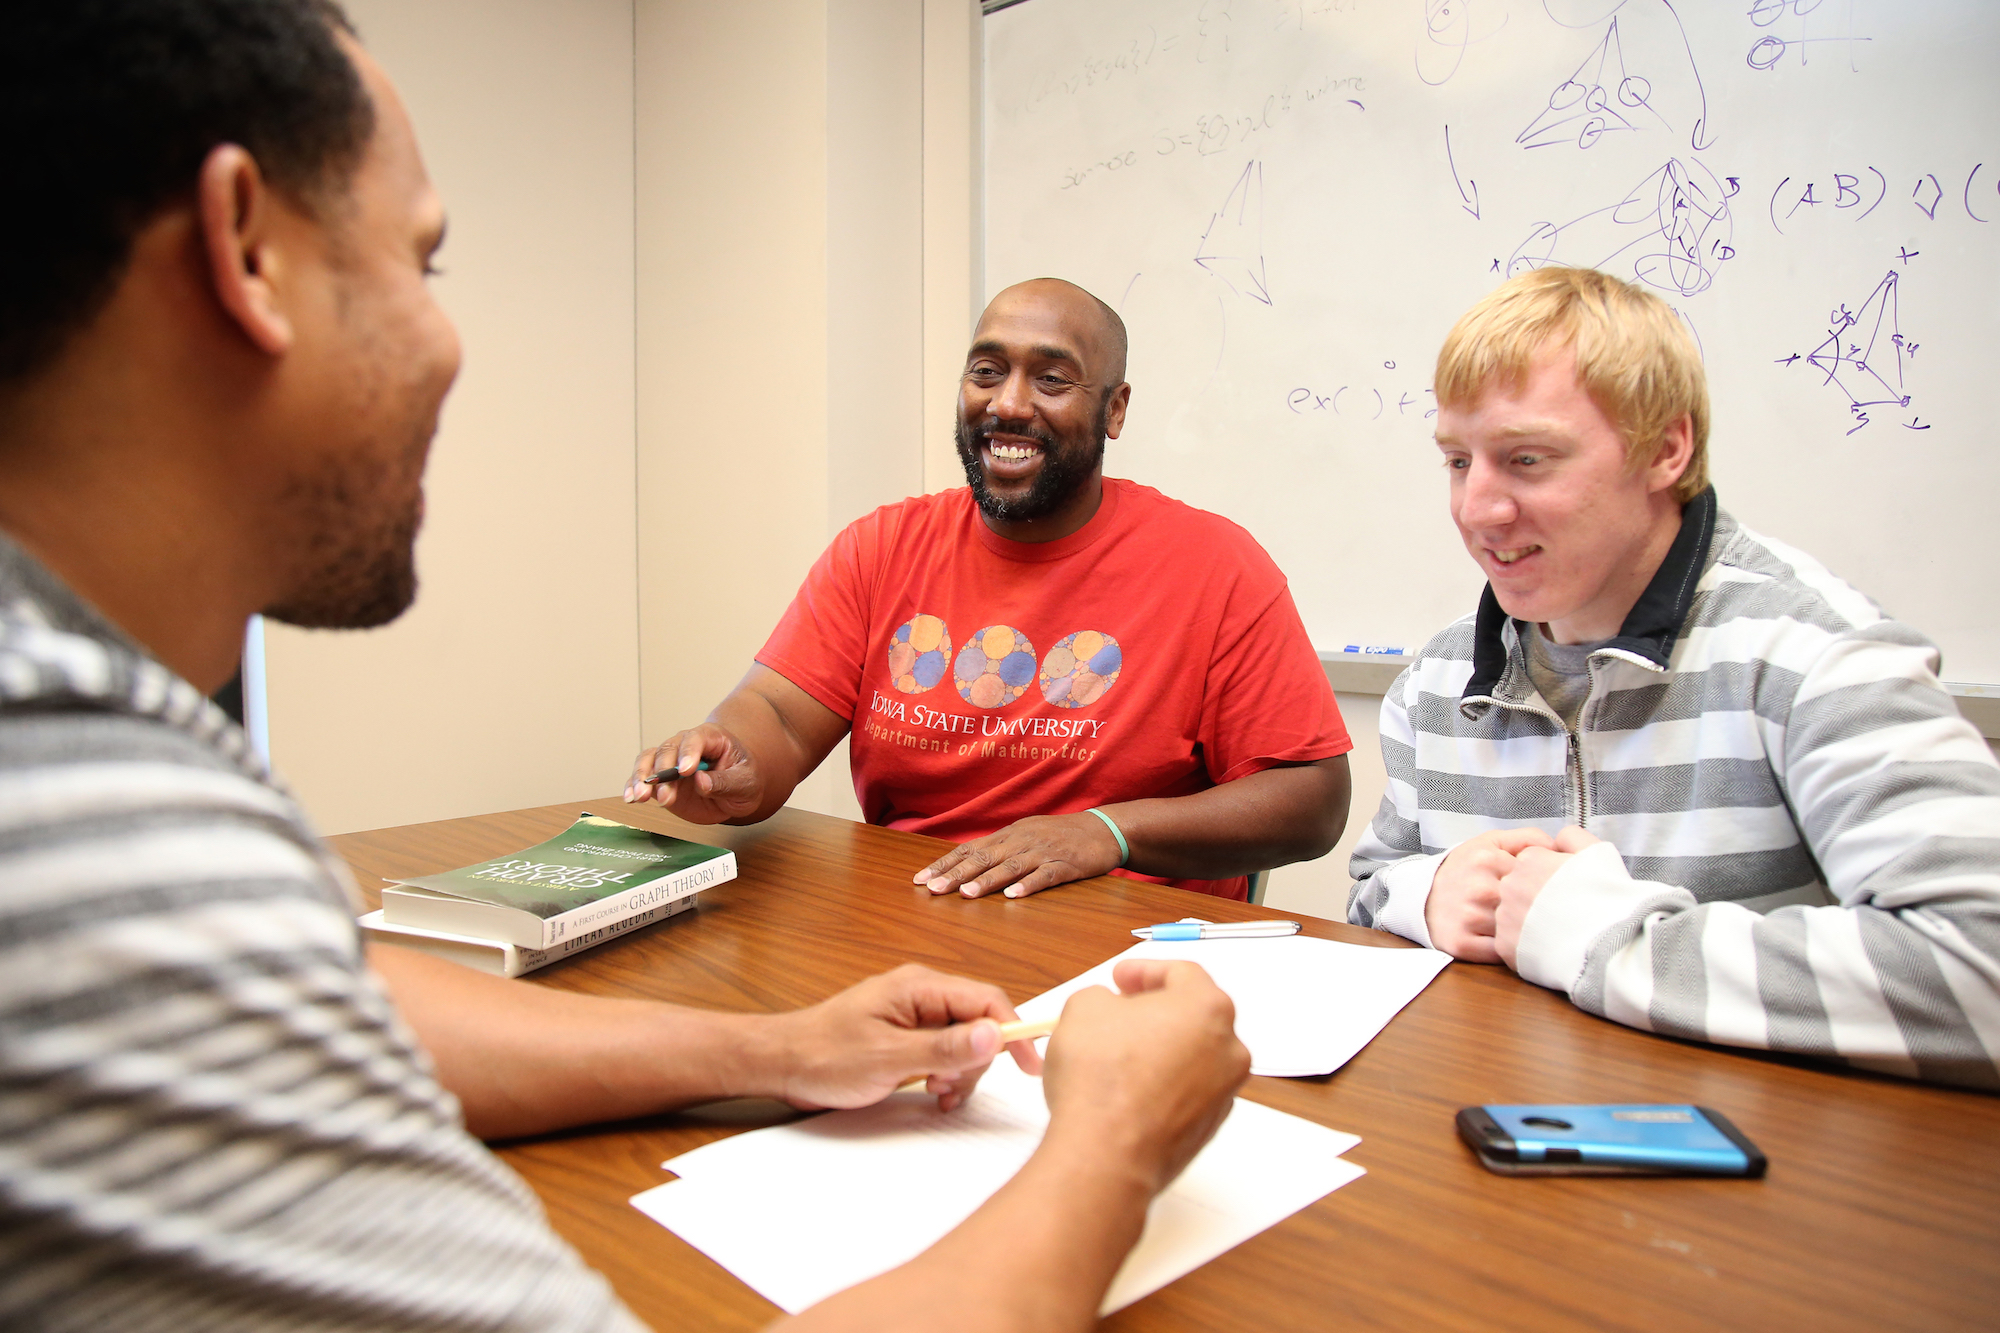 Michael Young, assistant professor of mathematics, in his office at a table working on math problems with graduate students Derek Young and Alex Schulte.